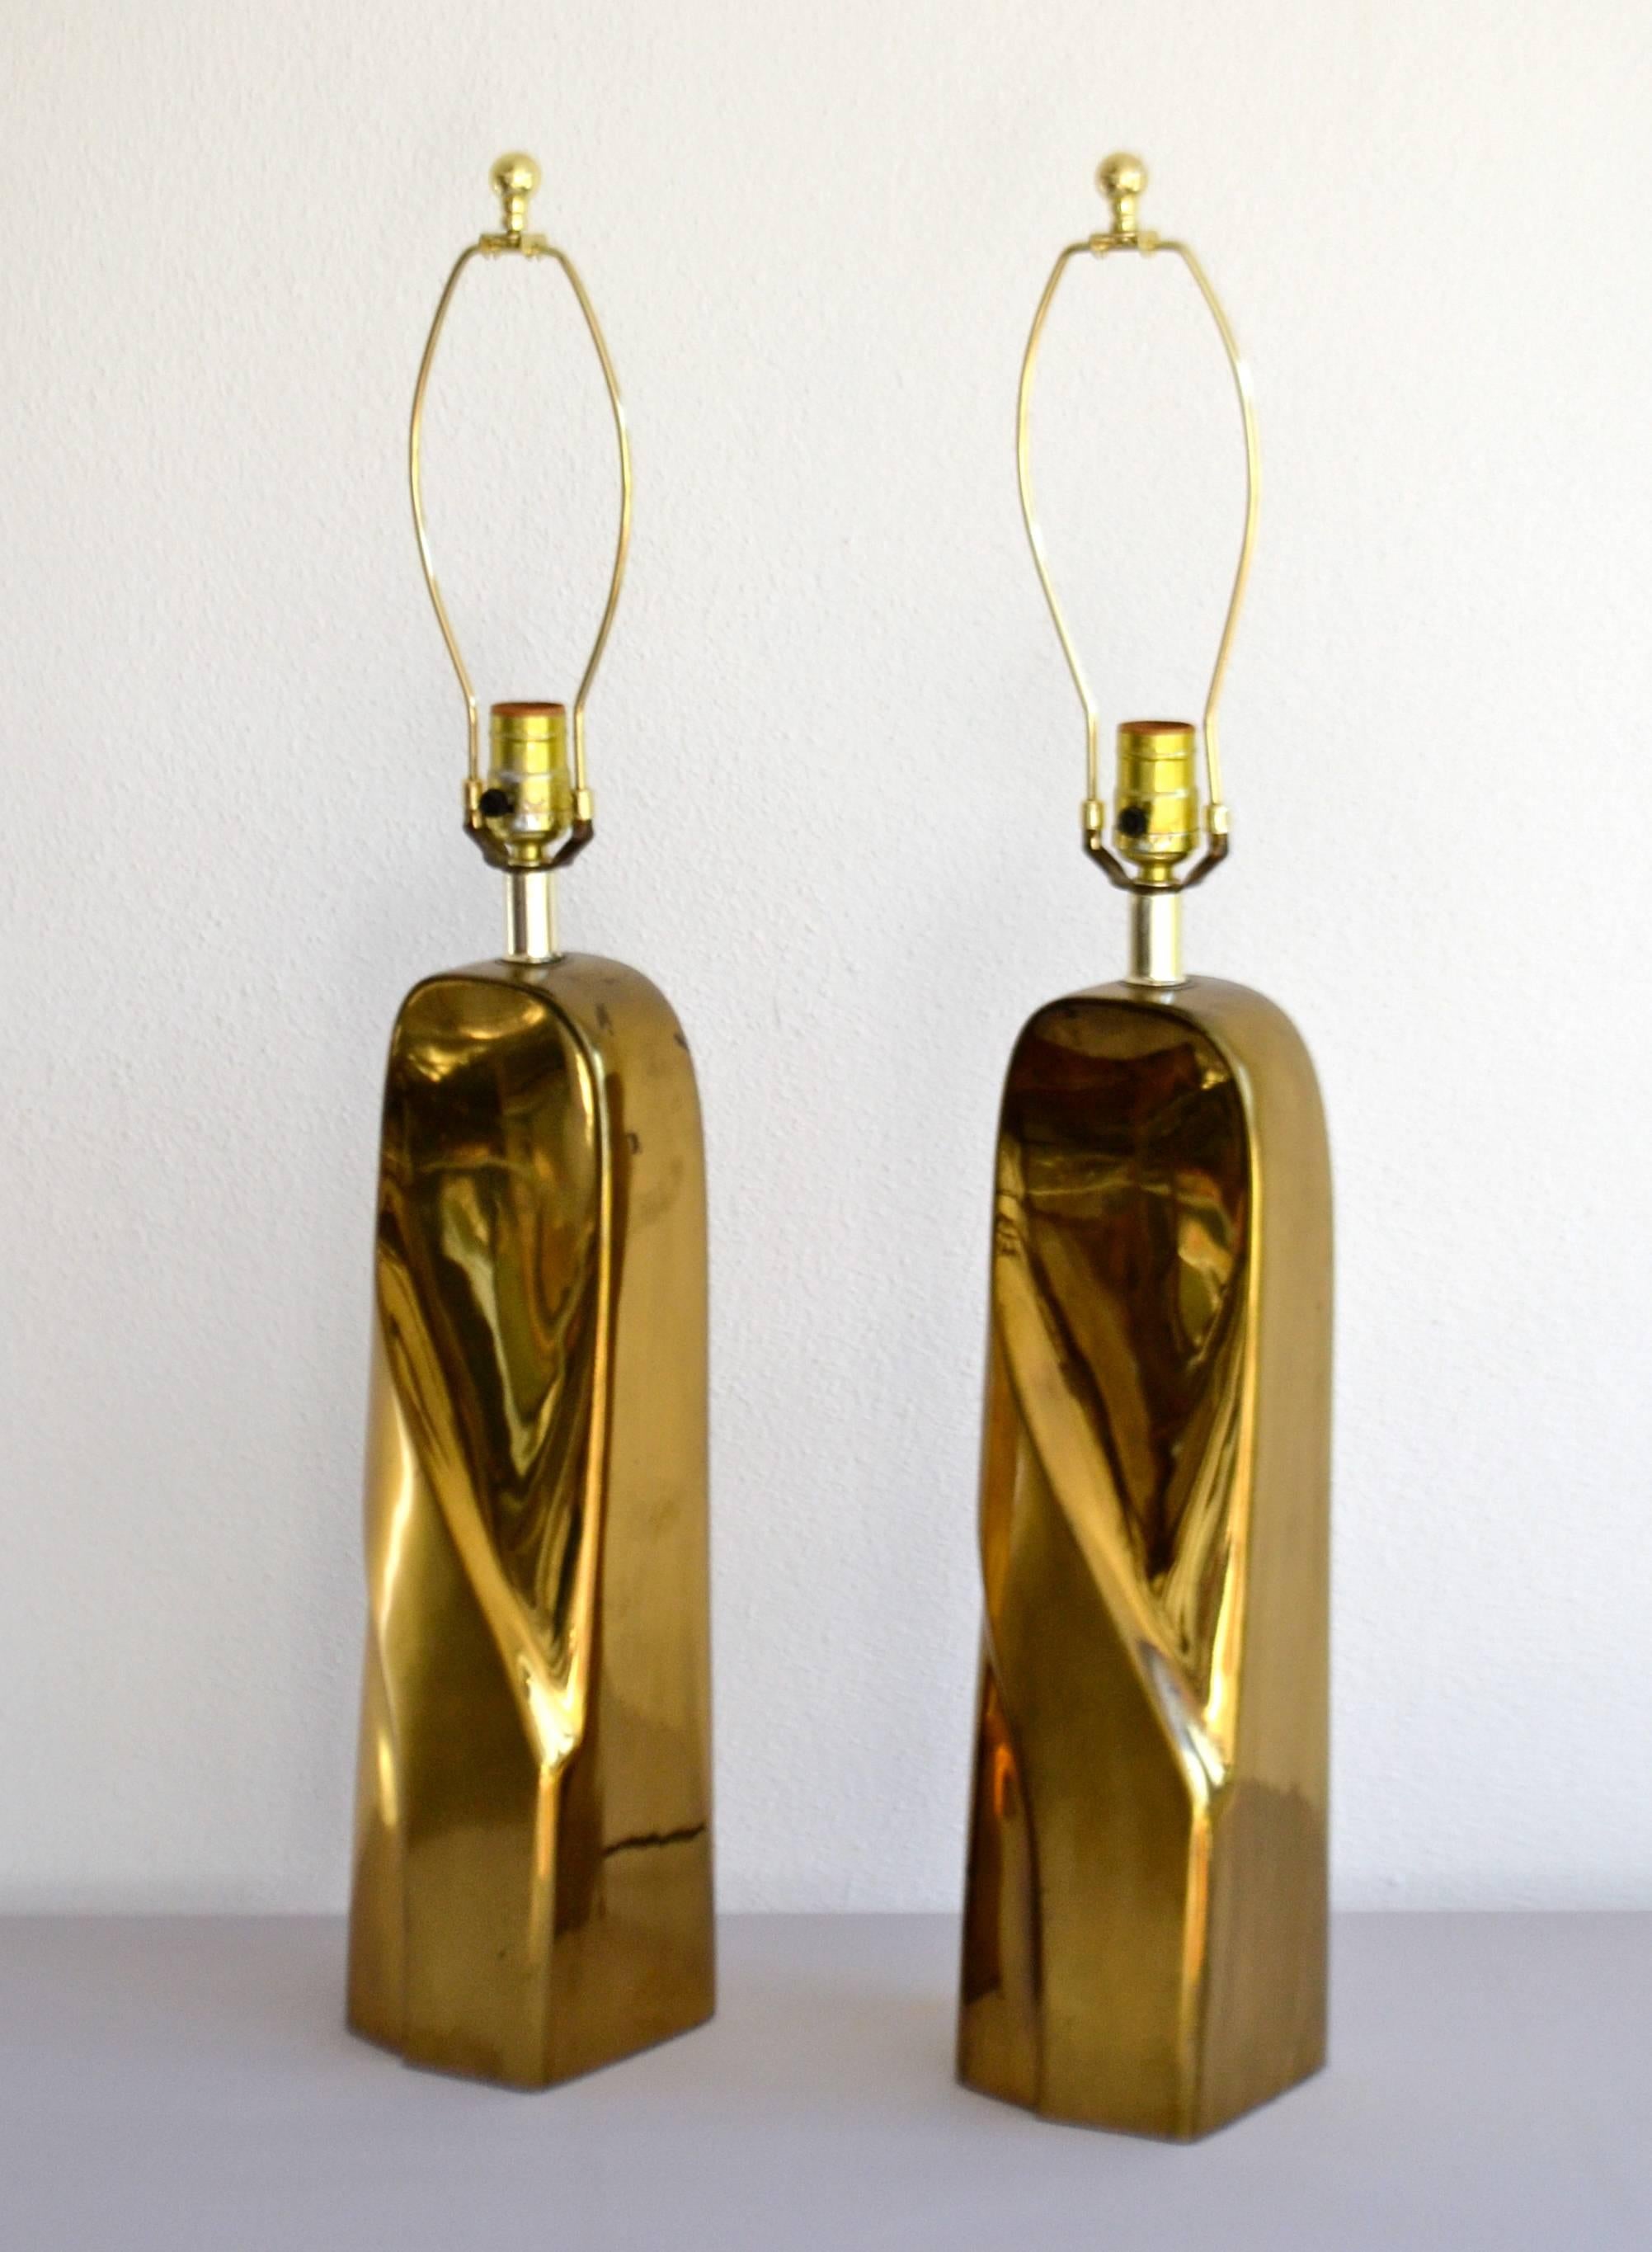 American Pair of Postmodern Polished Brass Table Lamps